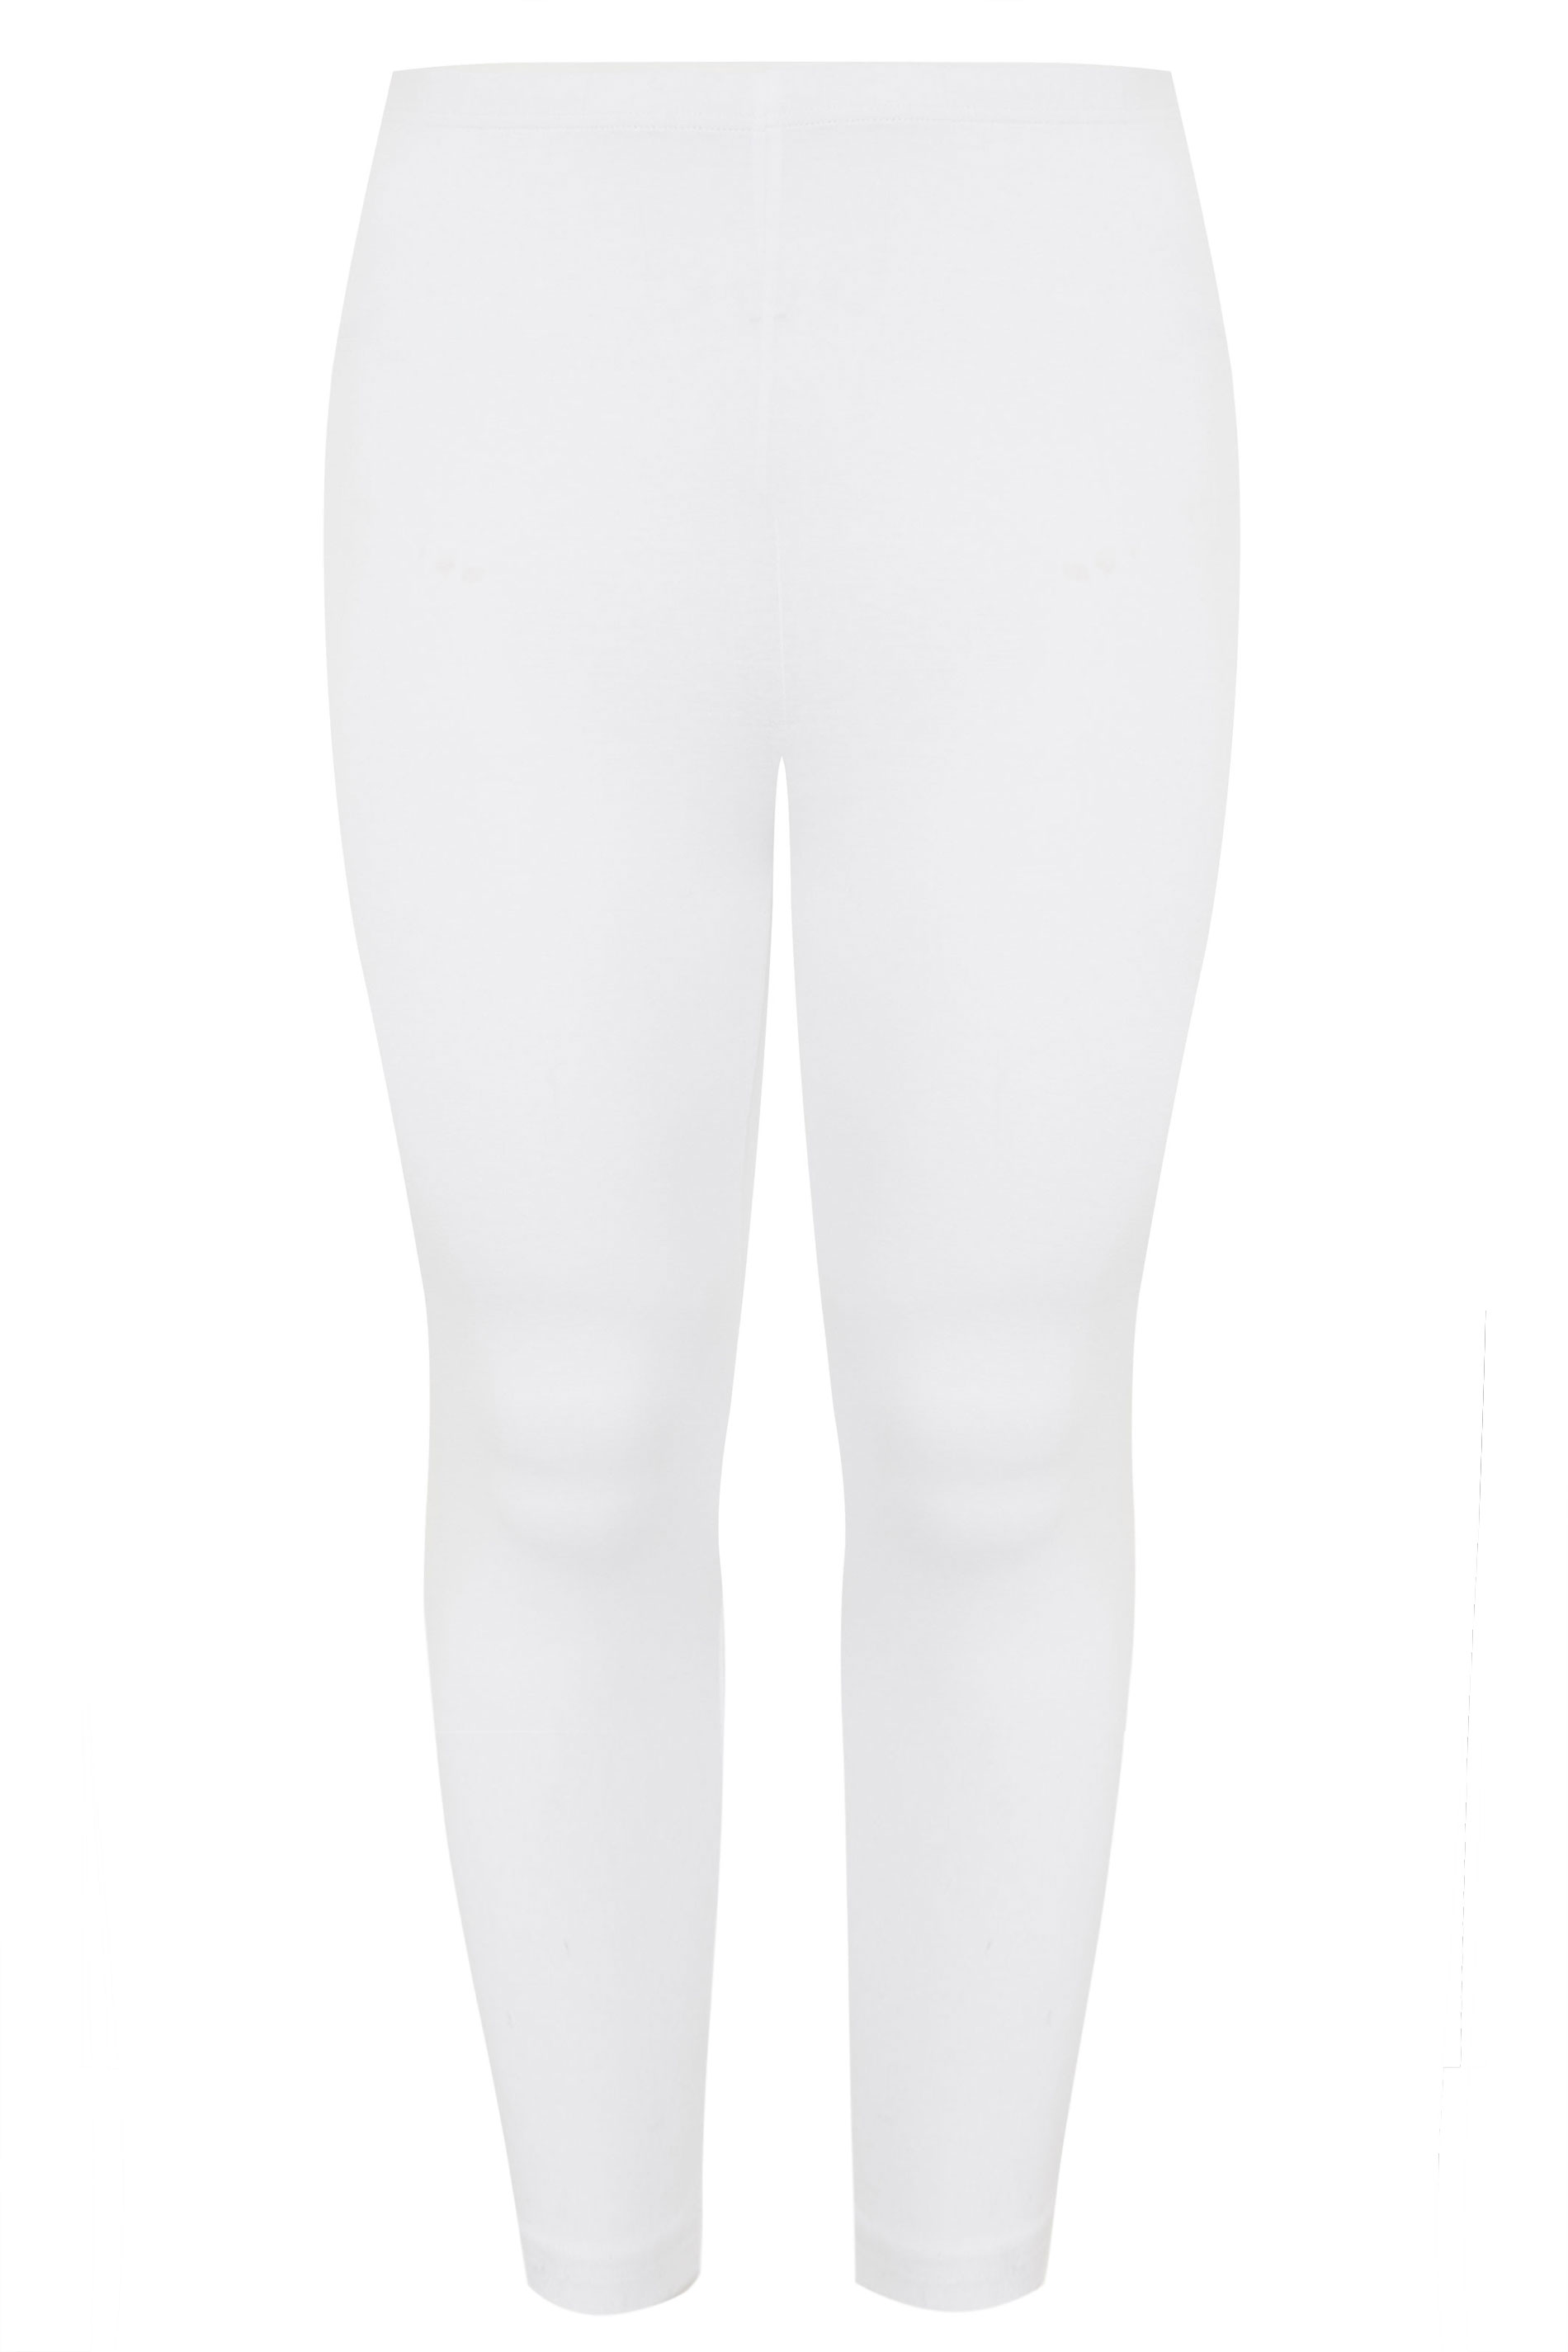 Plus SIze YOURS FOR GOOD White Organic Cotton Leggings | Yours Clothing 3